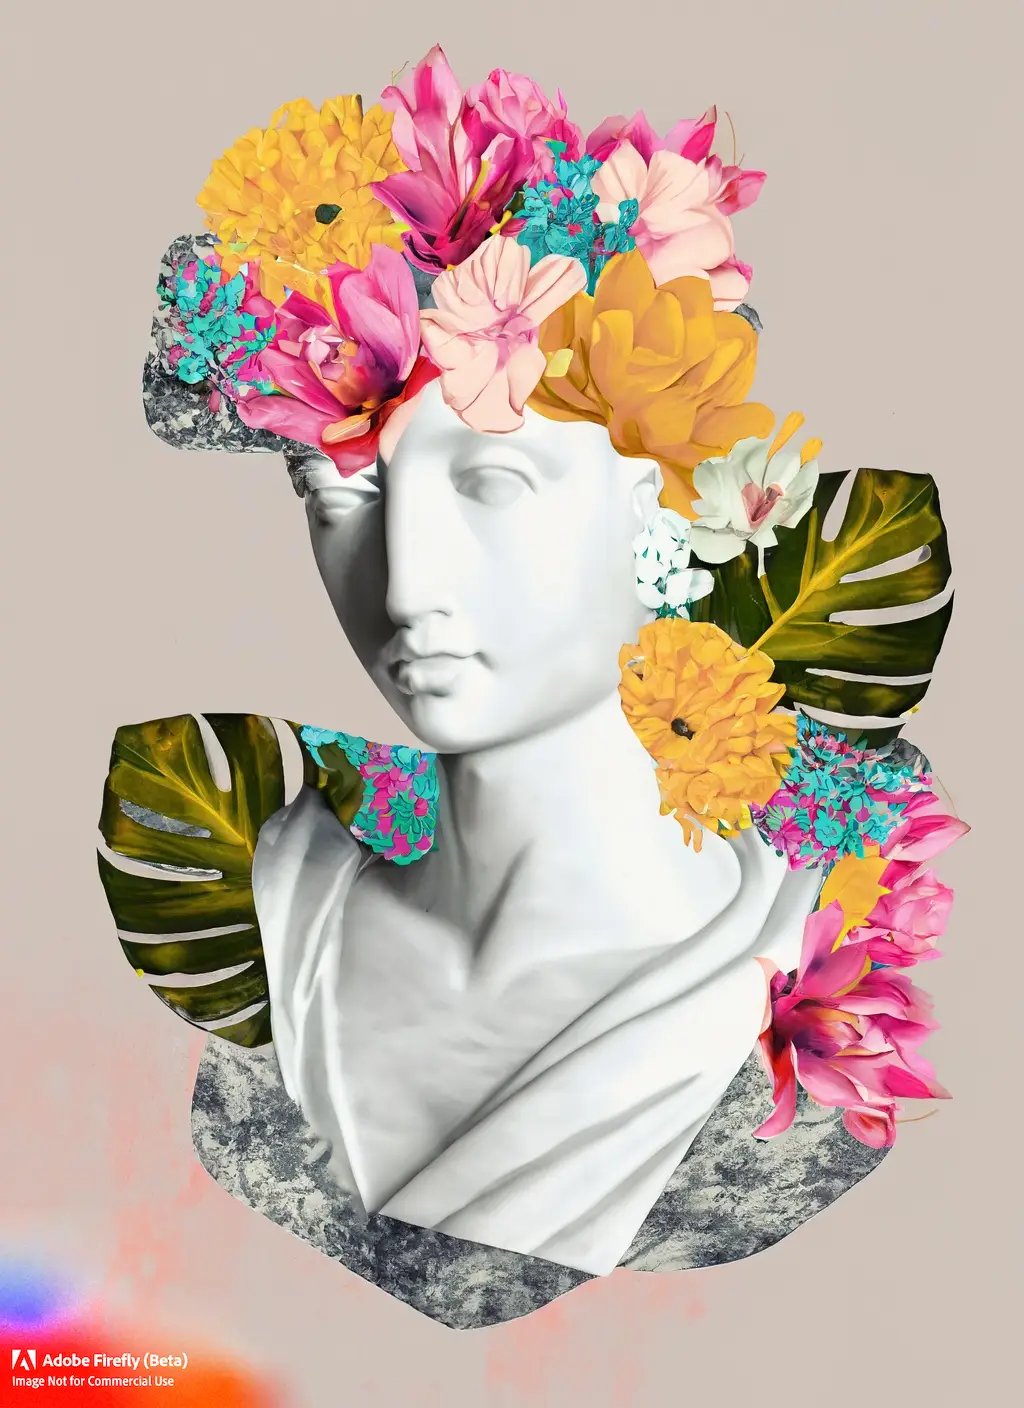 contemporary art collage of a geek marble statue and tropical flowers